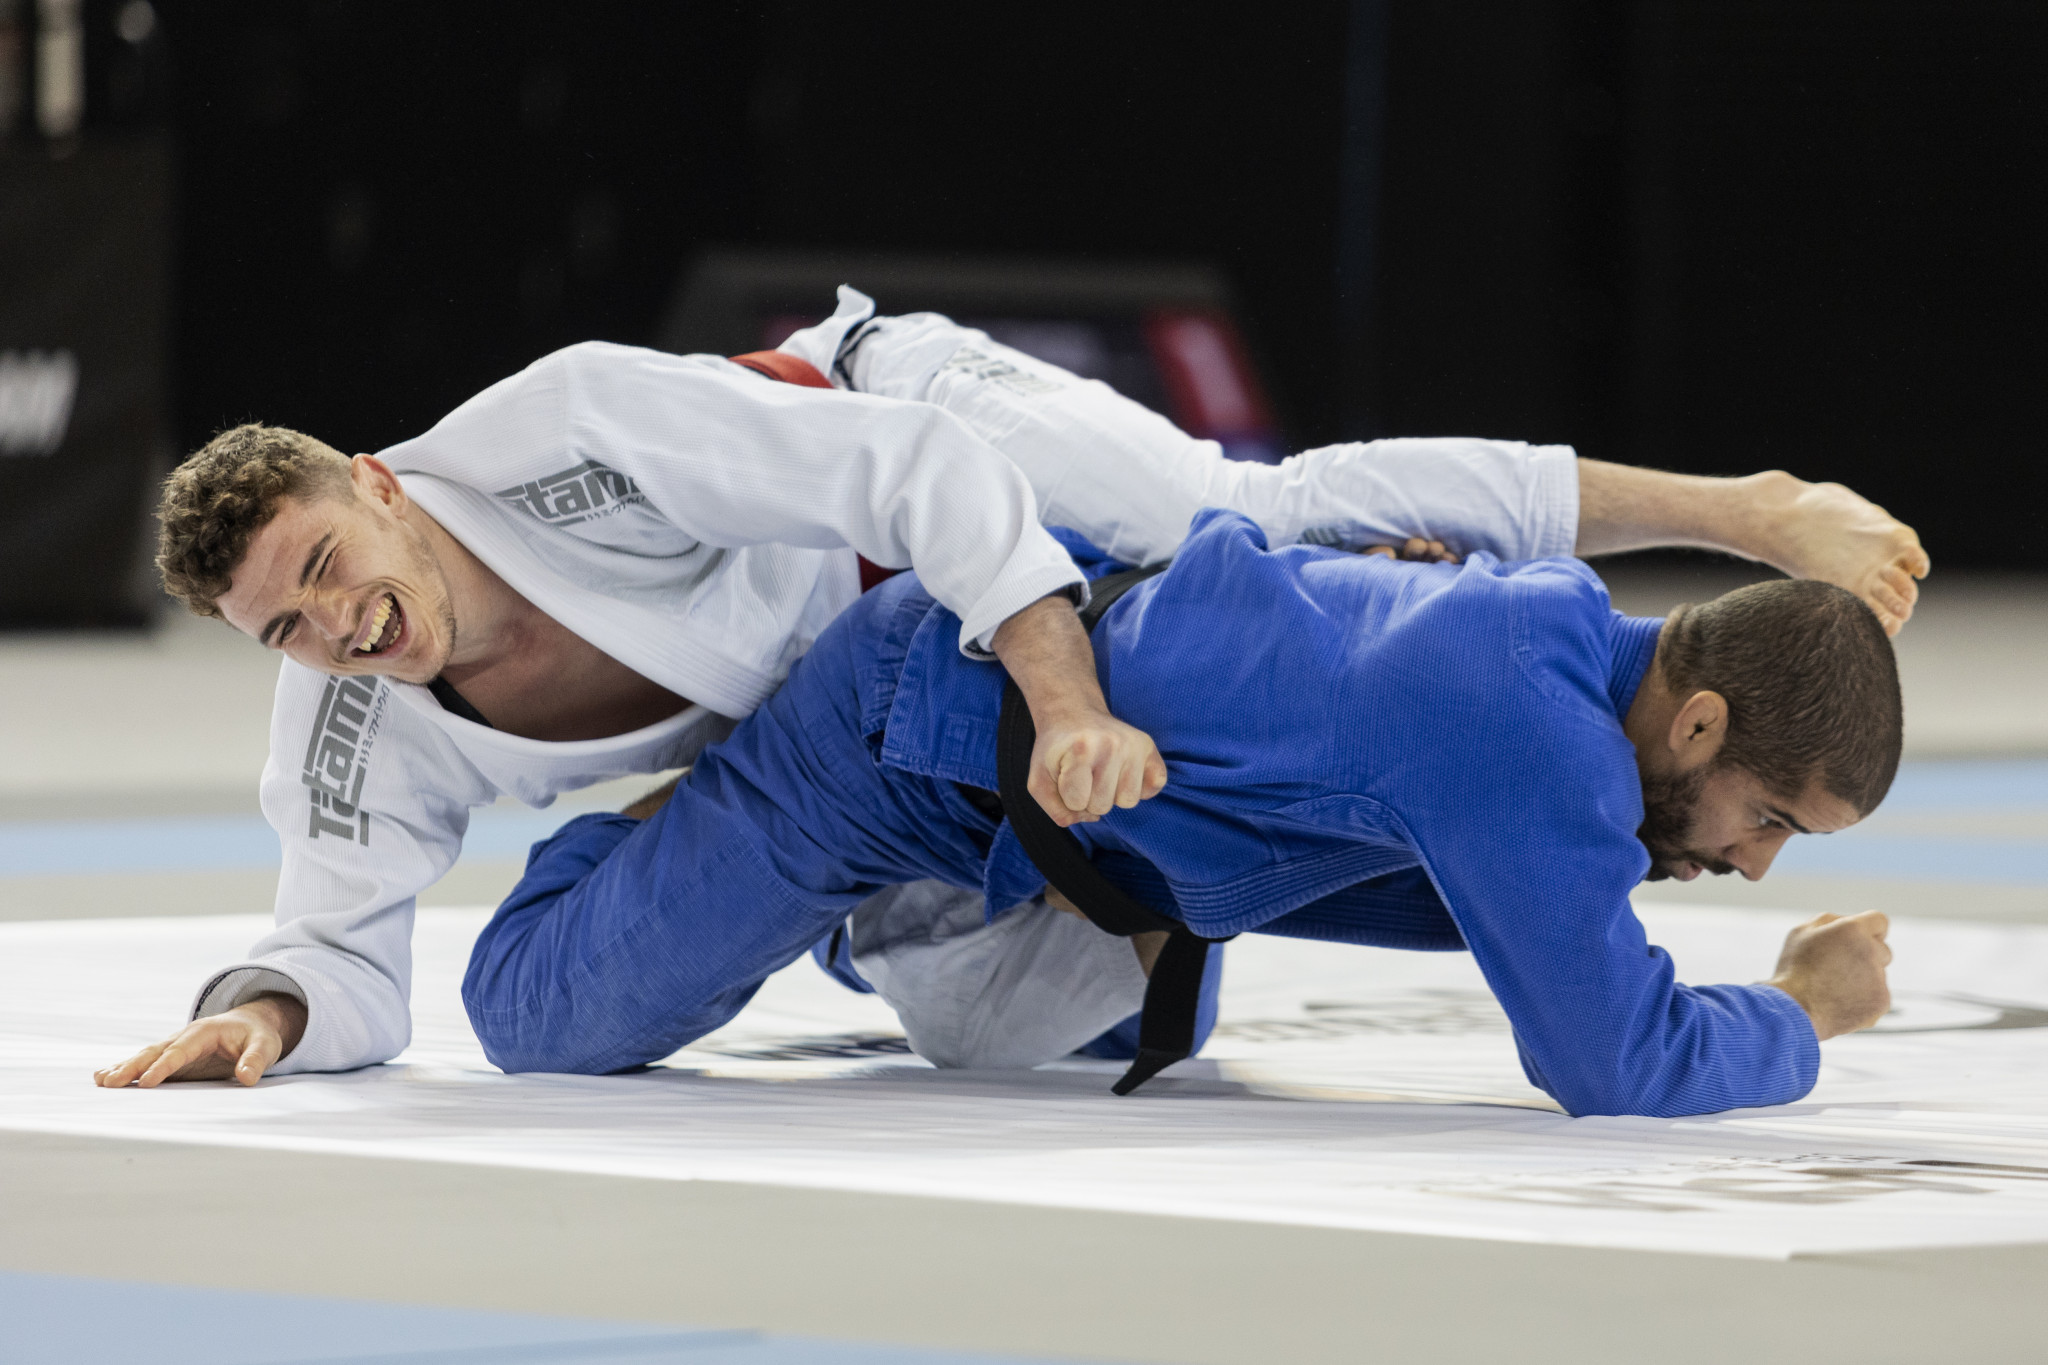 Youth and veterans take to the mat at AJP Tour leg in London